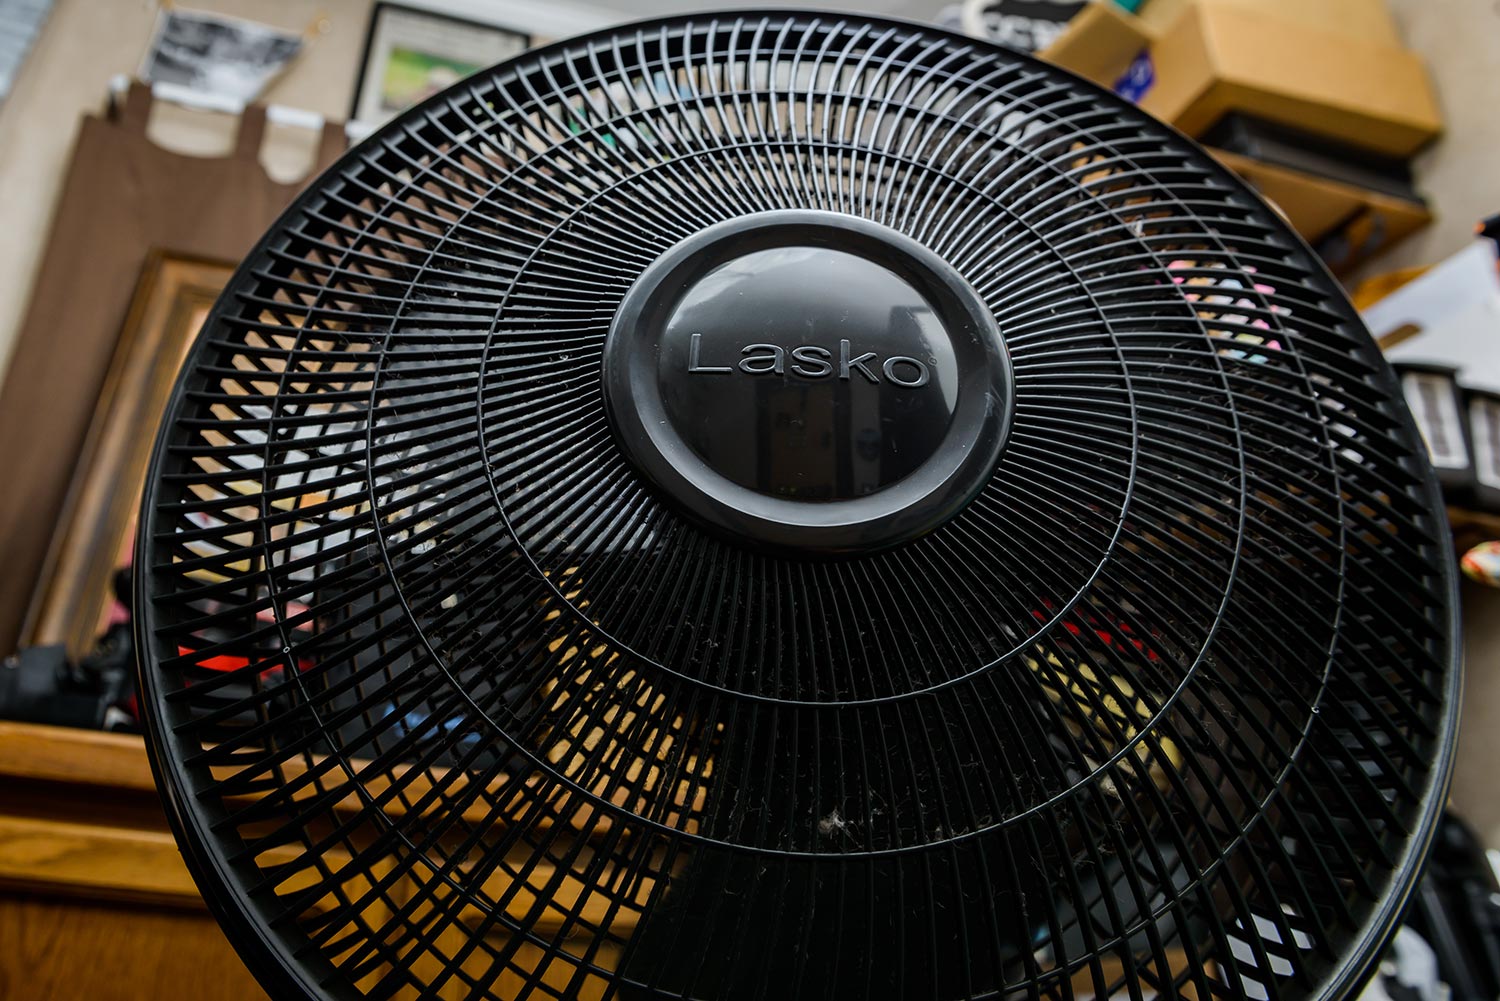 A Black interior fan by Lasko with dust built up along the outer ring as it blows air outward